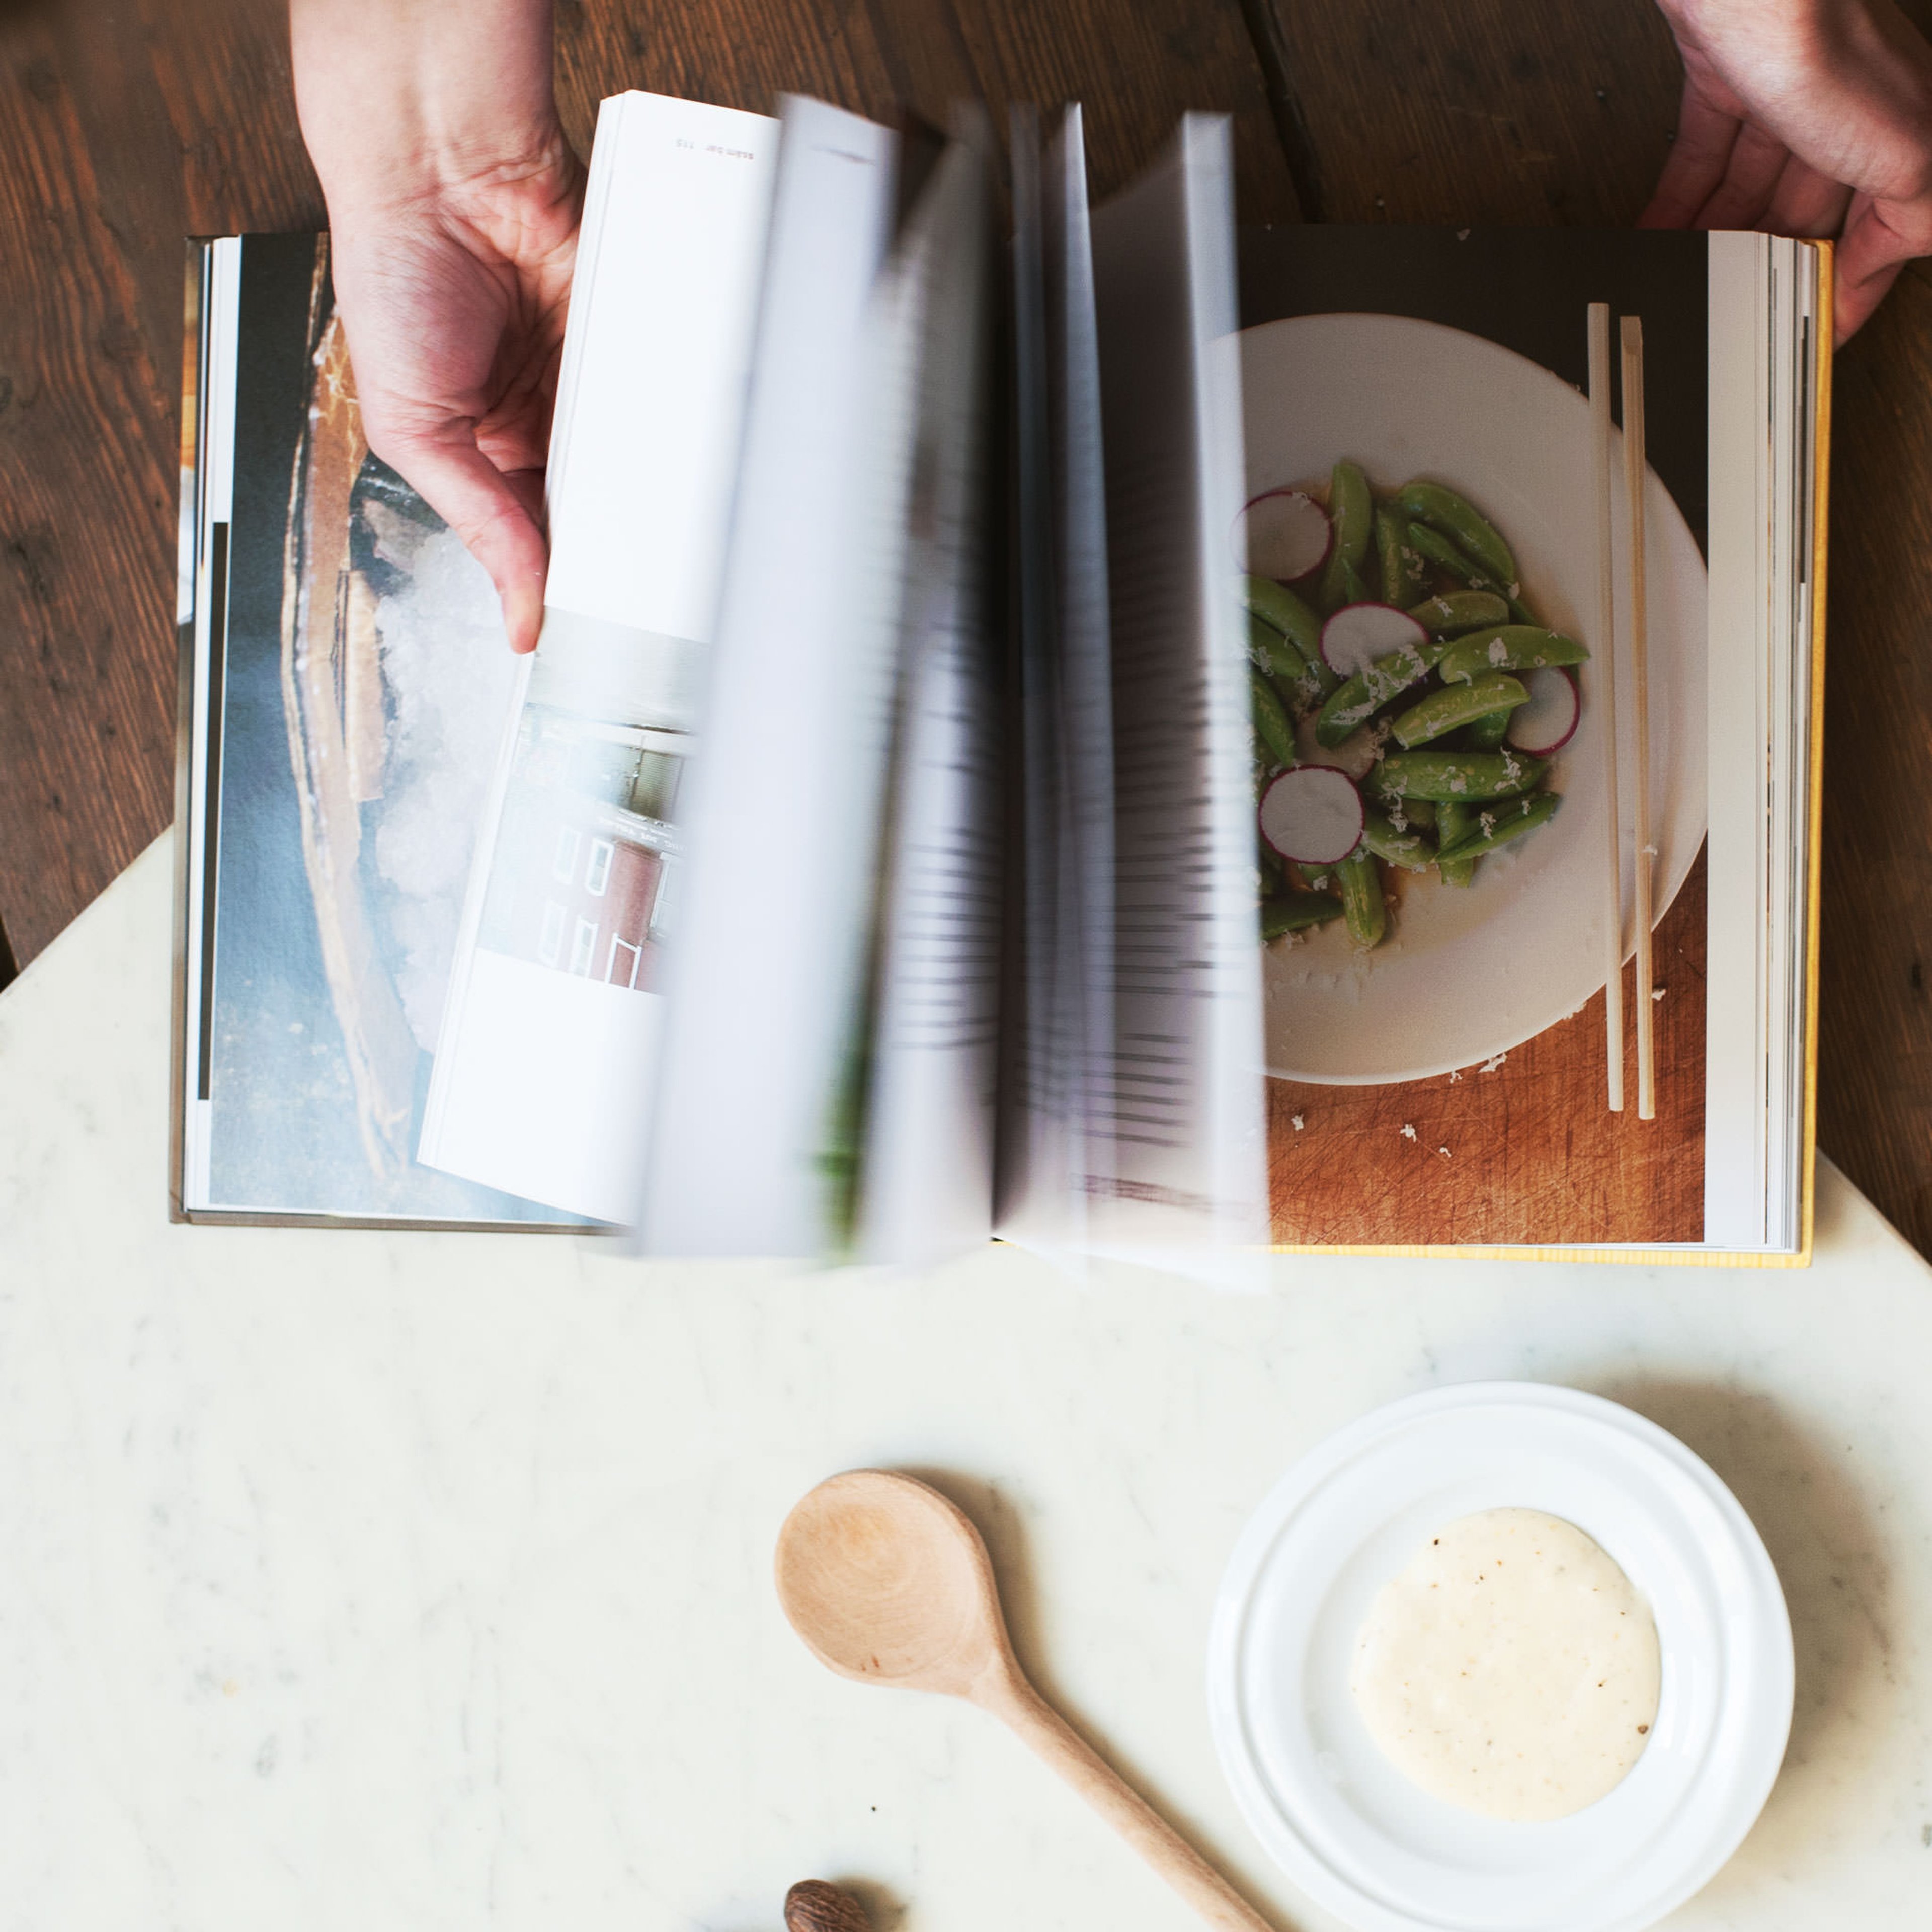 10 Cookbooks Everyone Should Have on Their Shelf